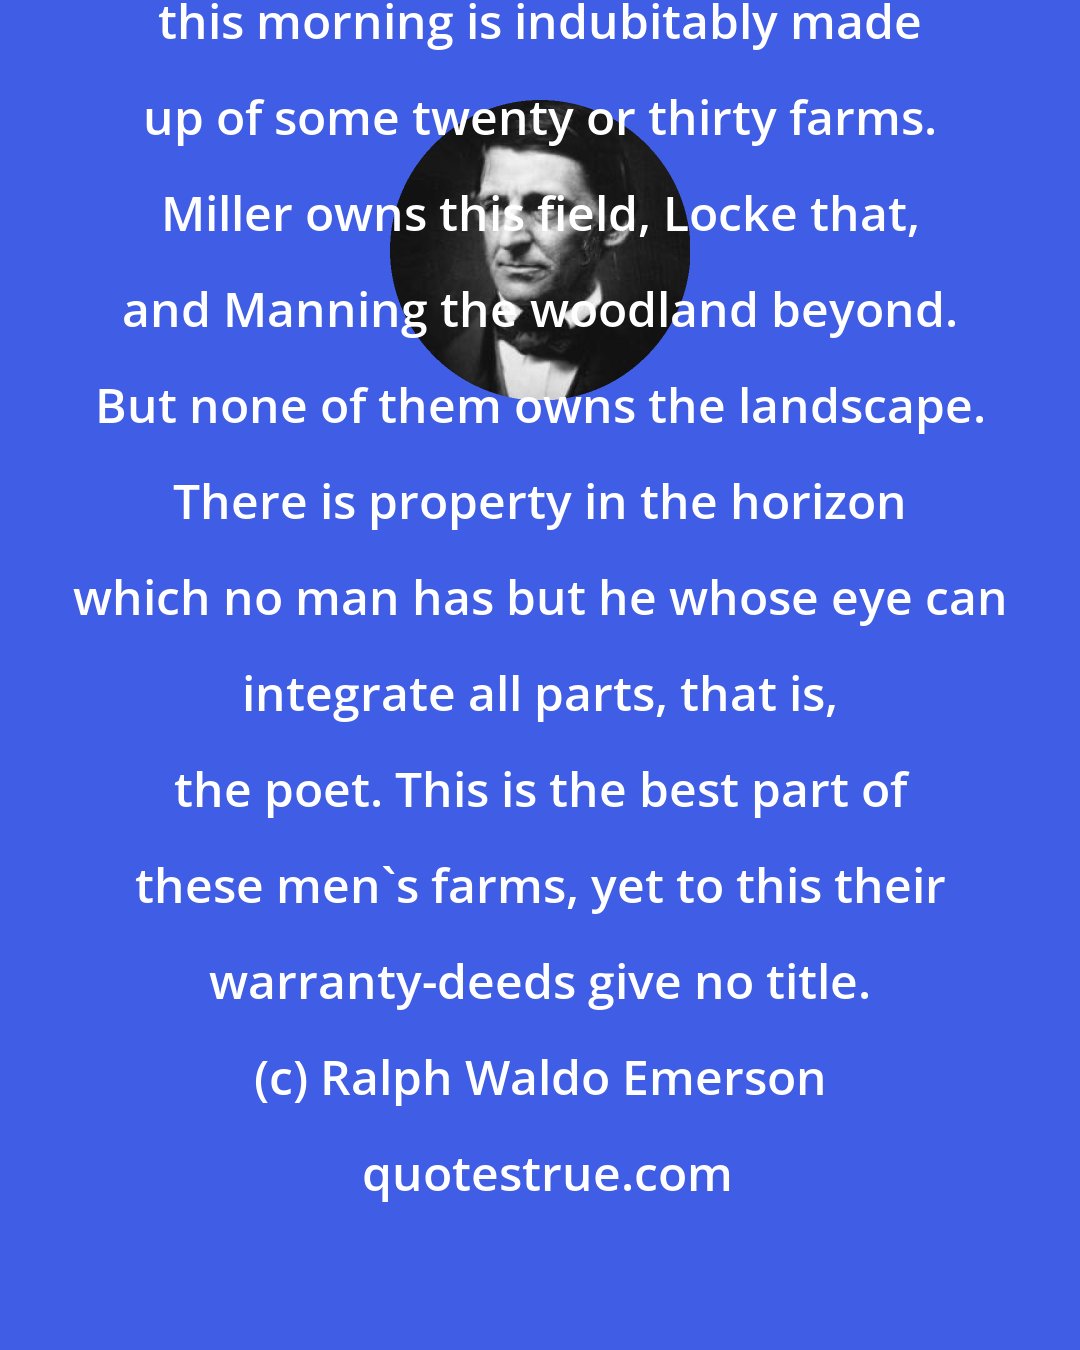 Ralph Waldo Emerson: The charming landscape which I saw this morning is indubitably made up of some twenty or thirty farms. Miller owns this field, Locke that, and Manning the woodland beyond. But none of them owns the landscape. There is property in the horizon which no man has but he whose eye can integrate all parts, that is, the poet. This is the best part of these men's farms, yet to this their warranty-deeds give no title.